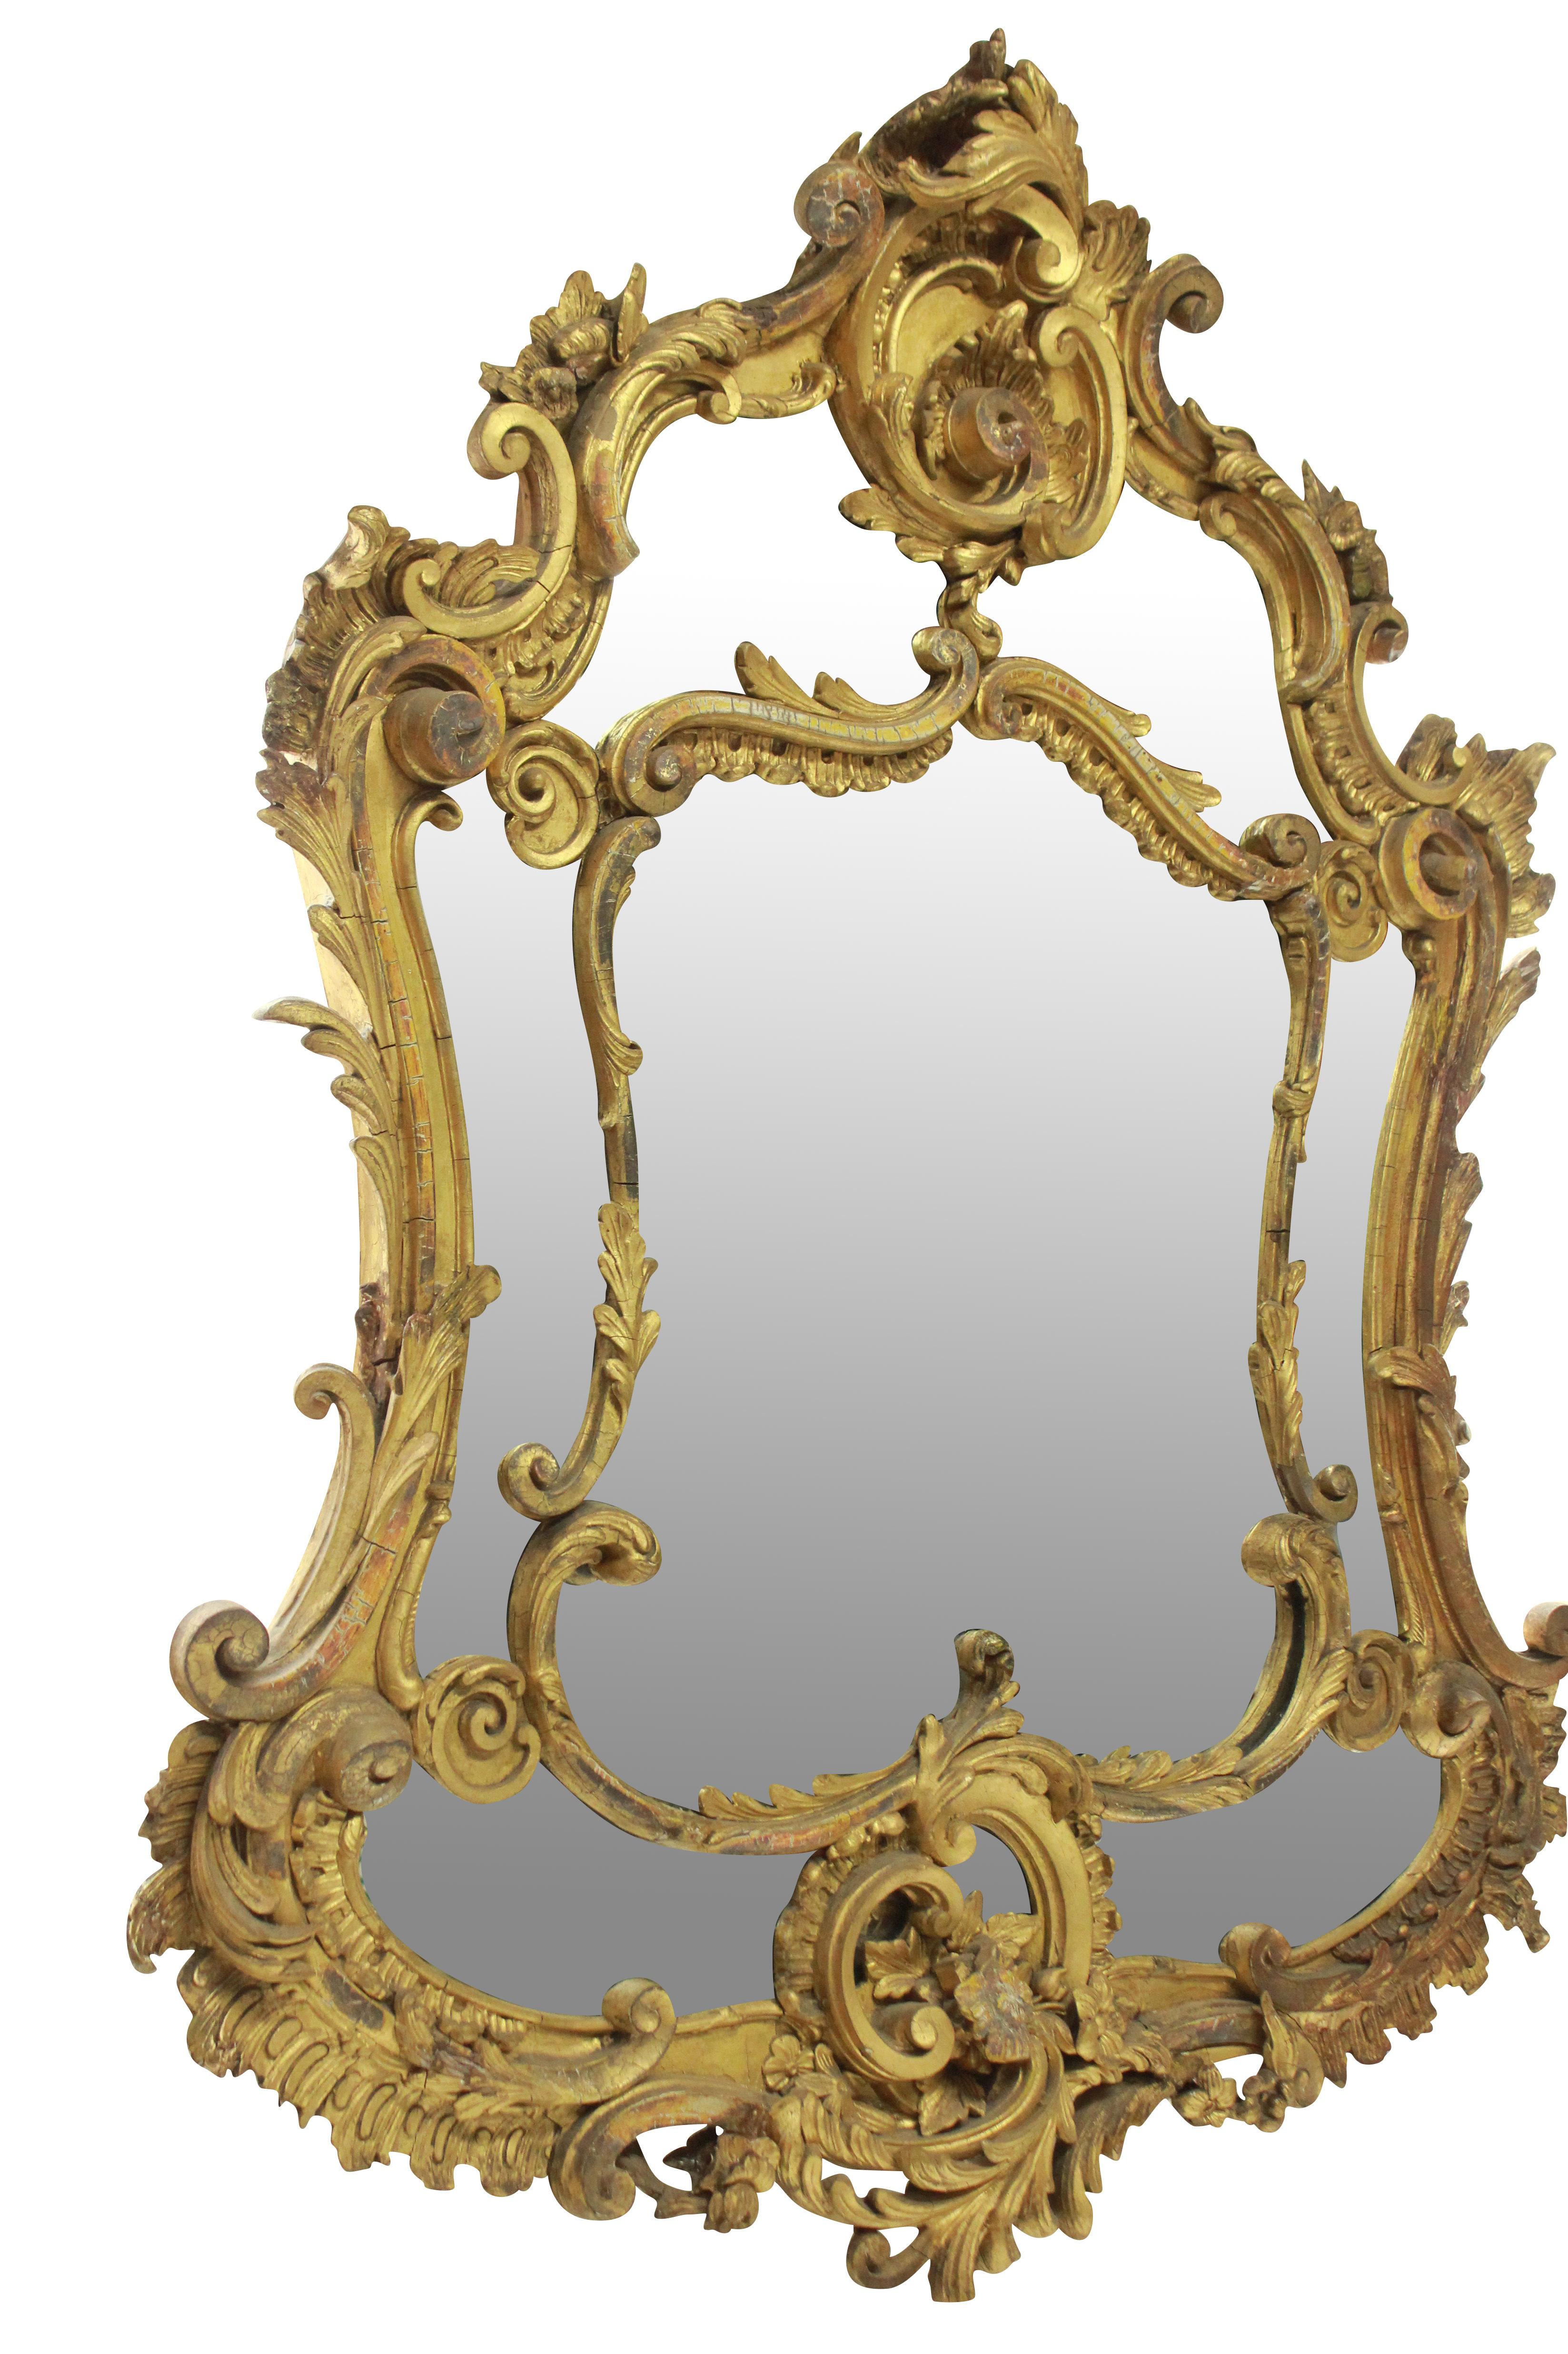 A French, late 18th century giltwood mirror in the Rococo manner.